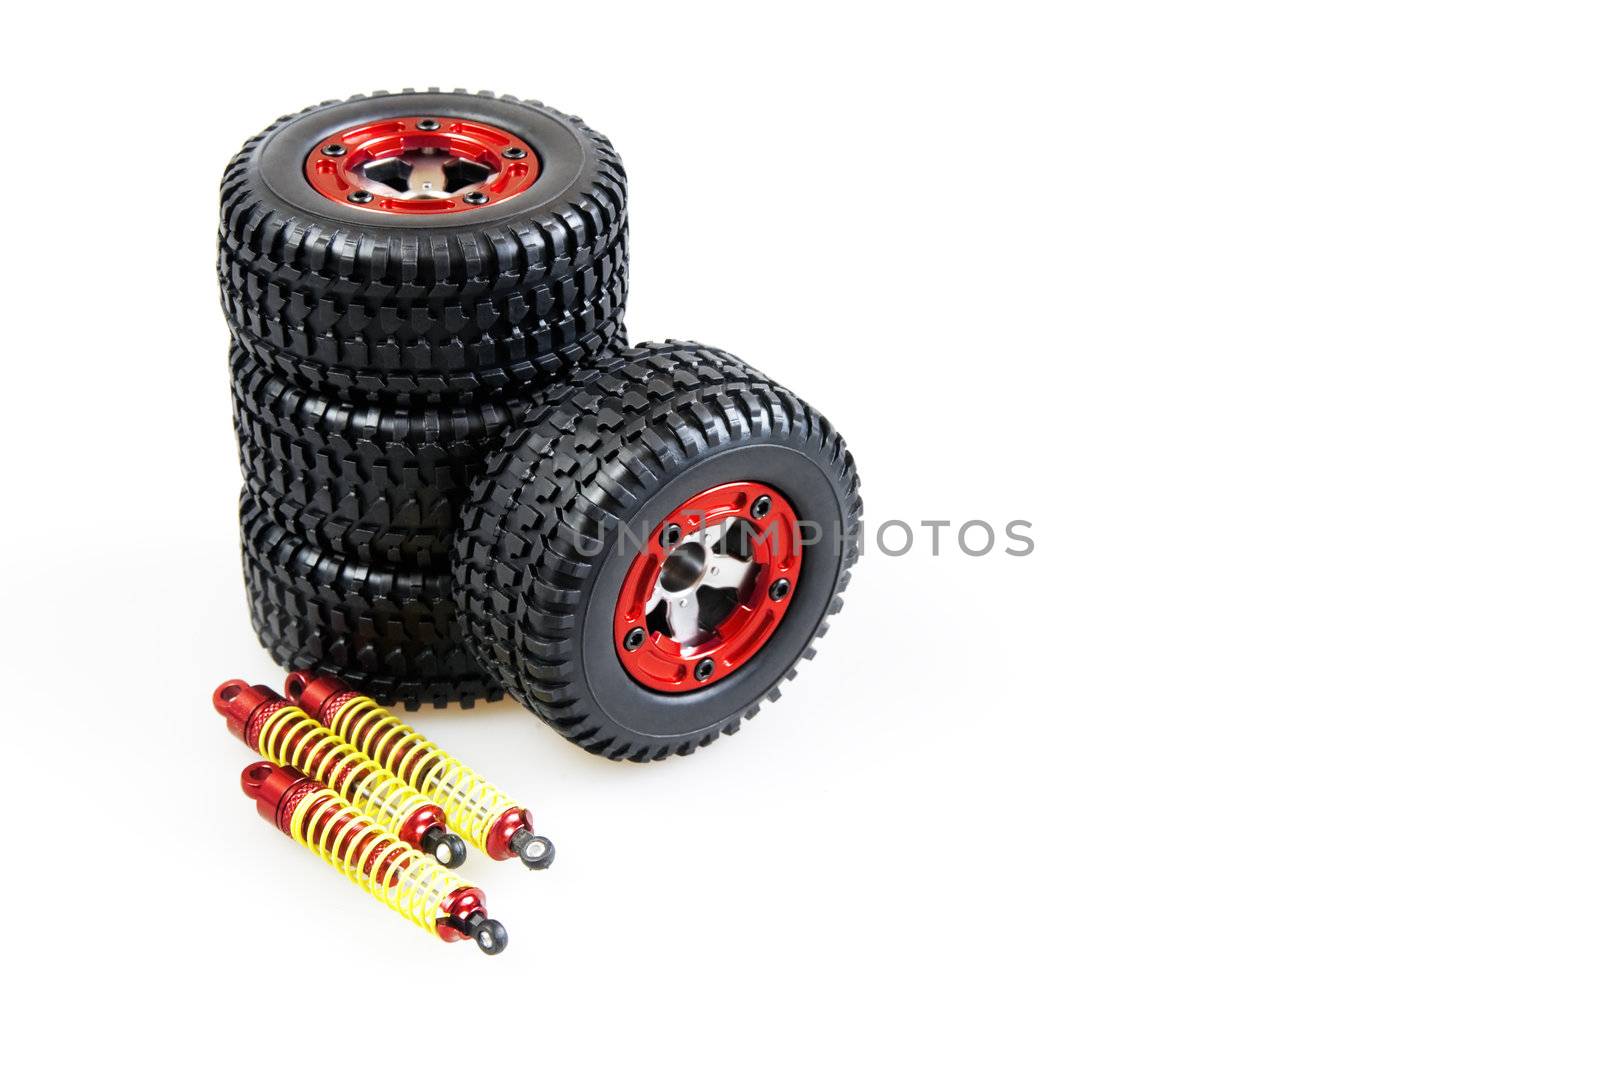 shock-absorbers and wheels of rc car on a white background by Serp